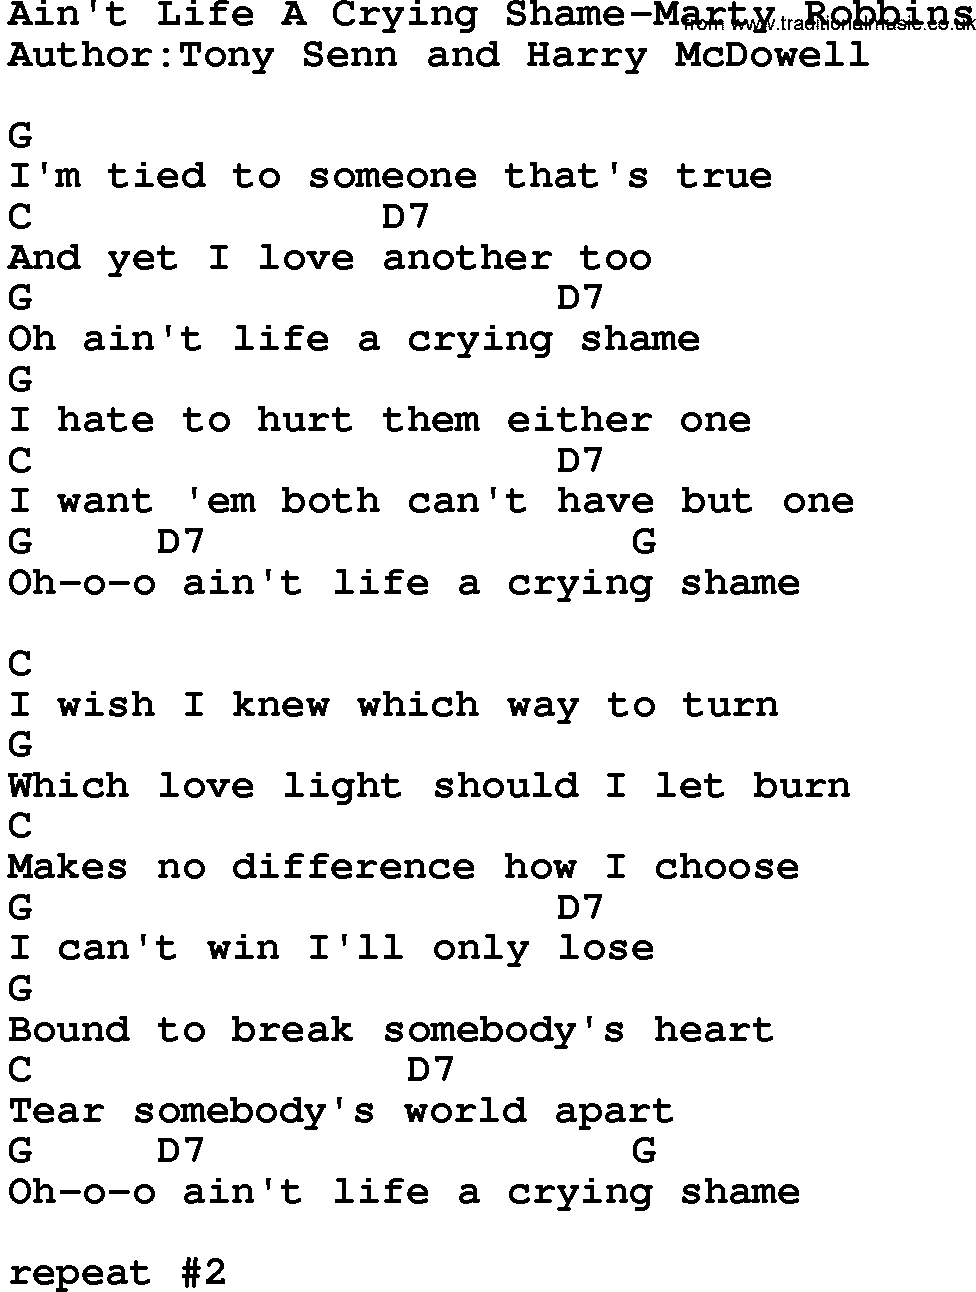 Country music song: Ain't Life A Crying Shame-Marty Robbins lyrics and chords